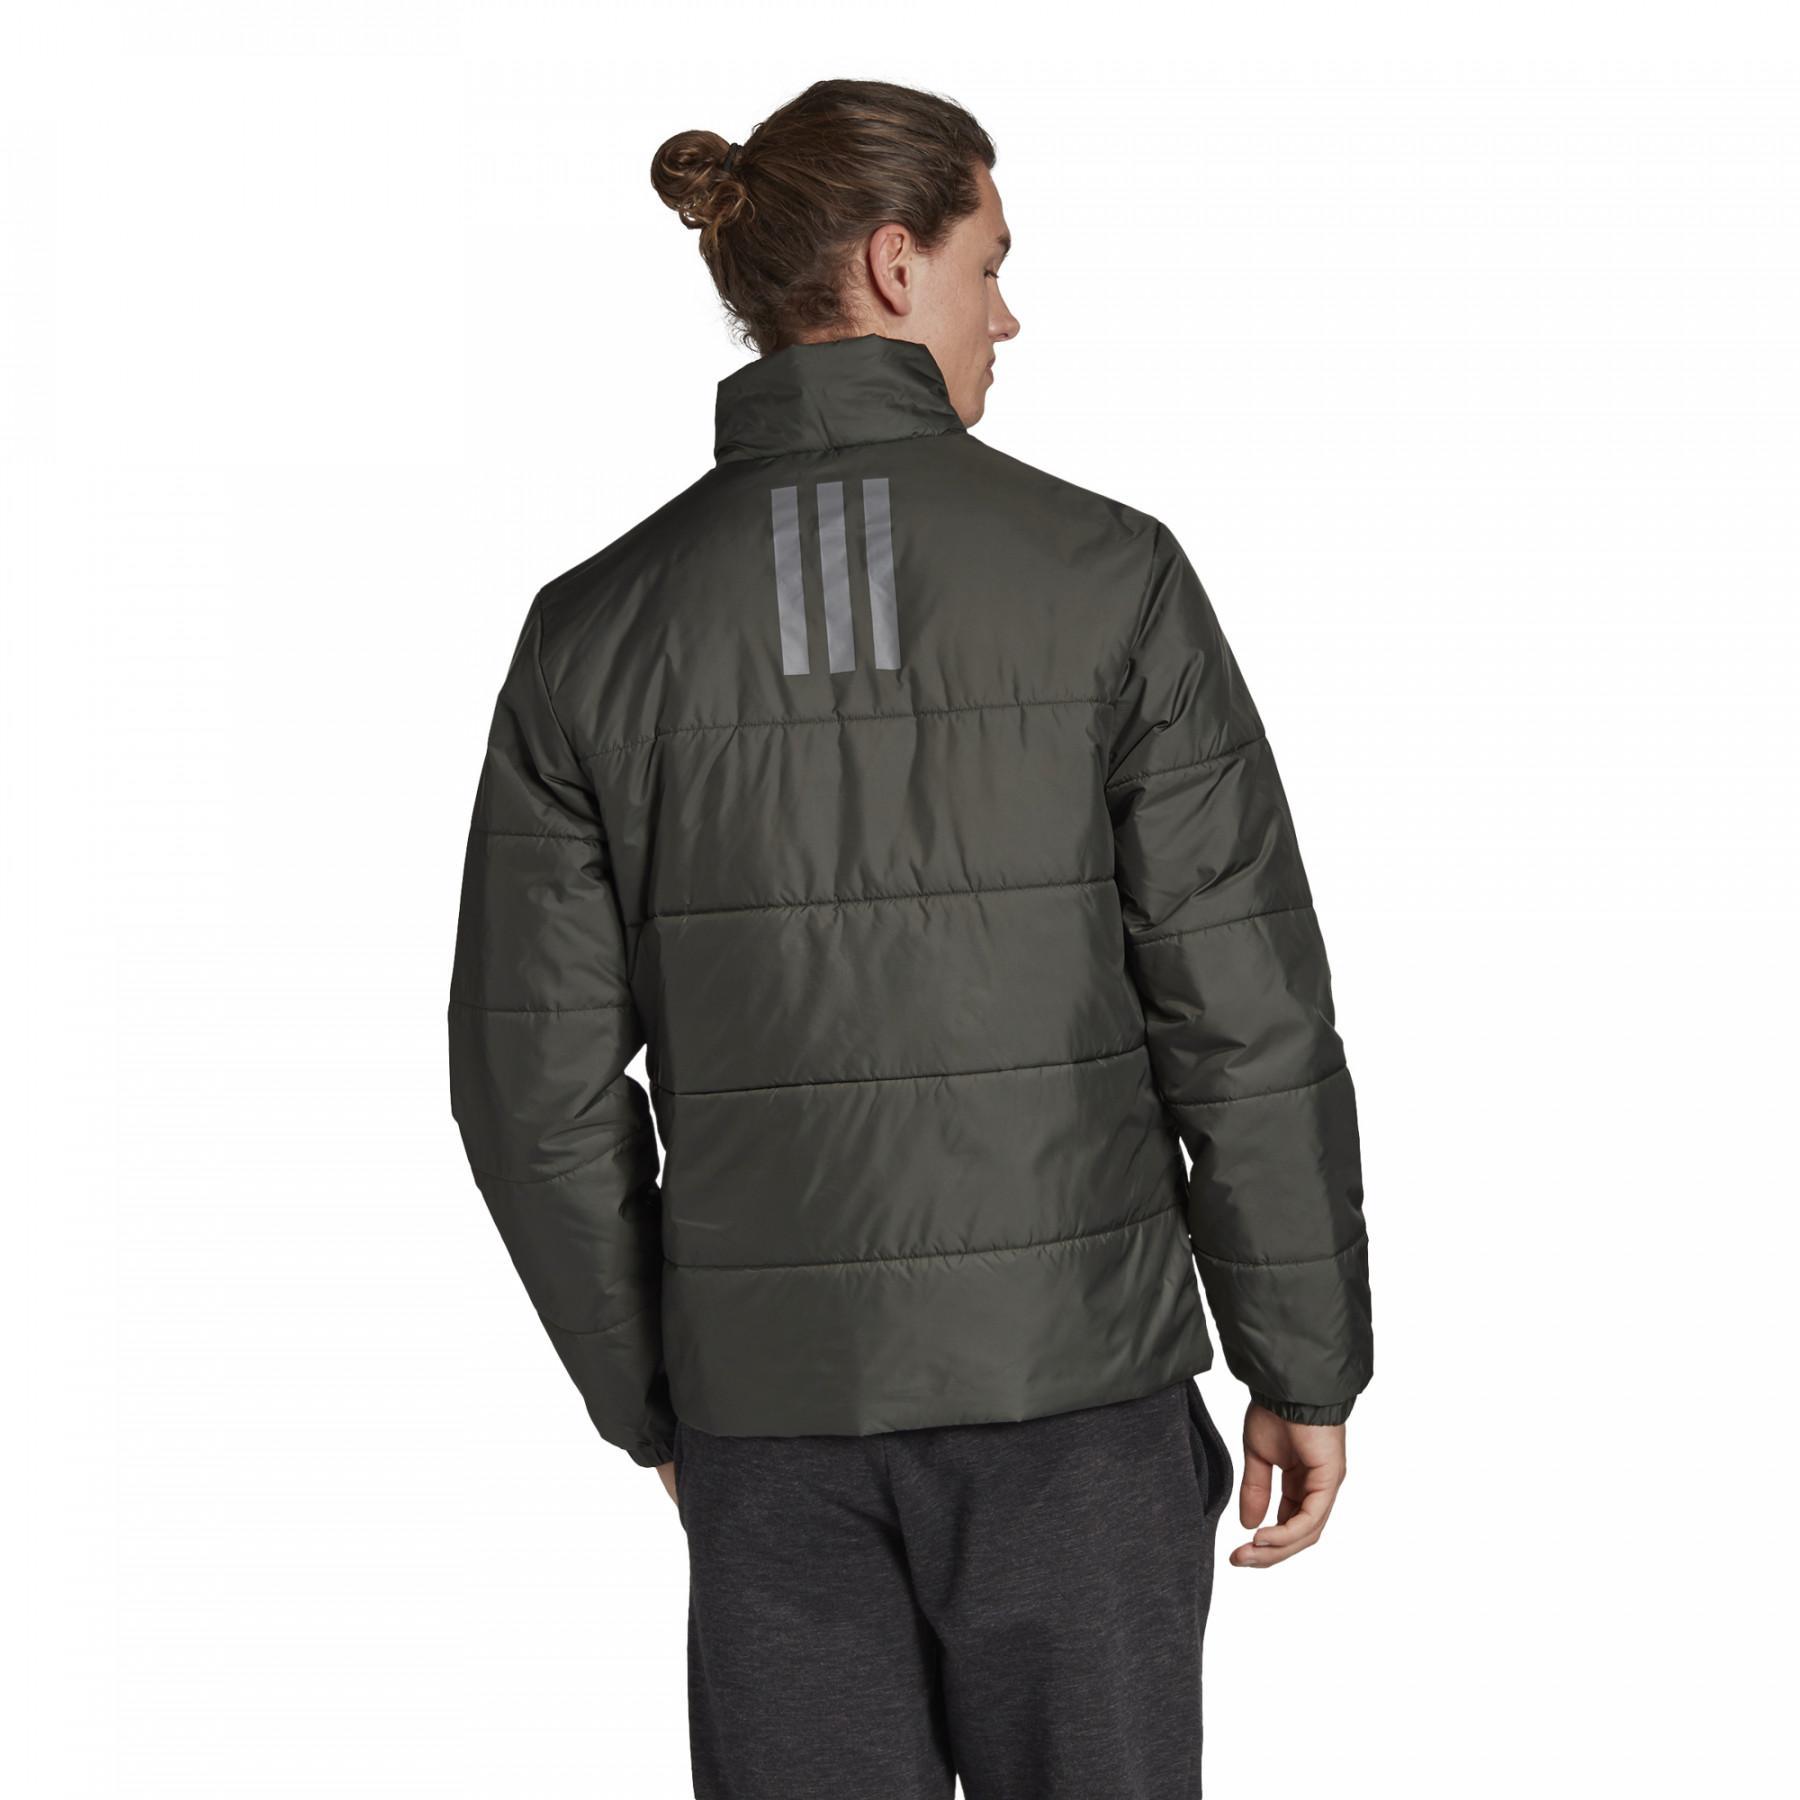 Casaco Training adidas BSC 3-Stripes Insulated